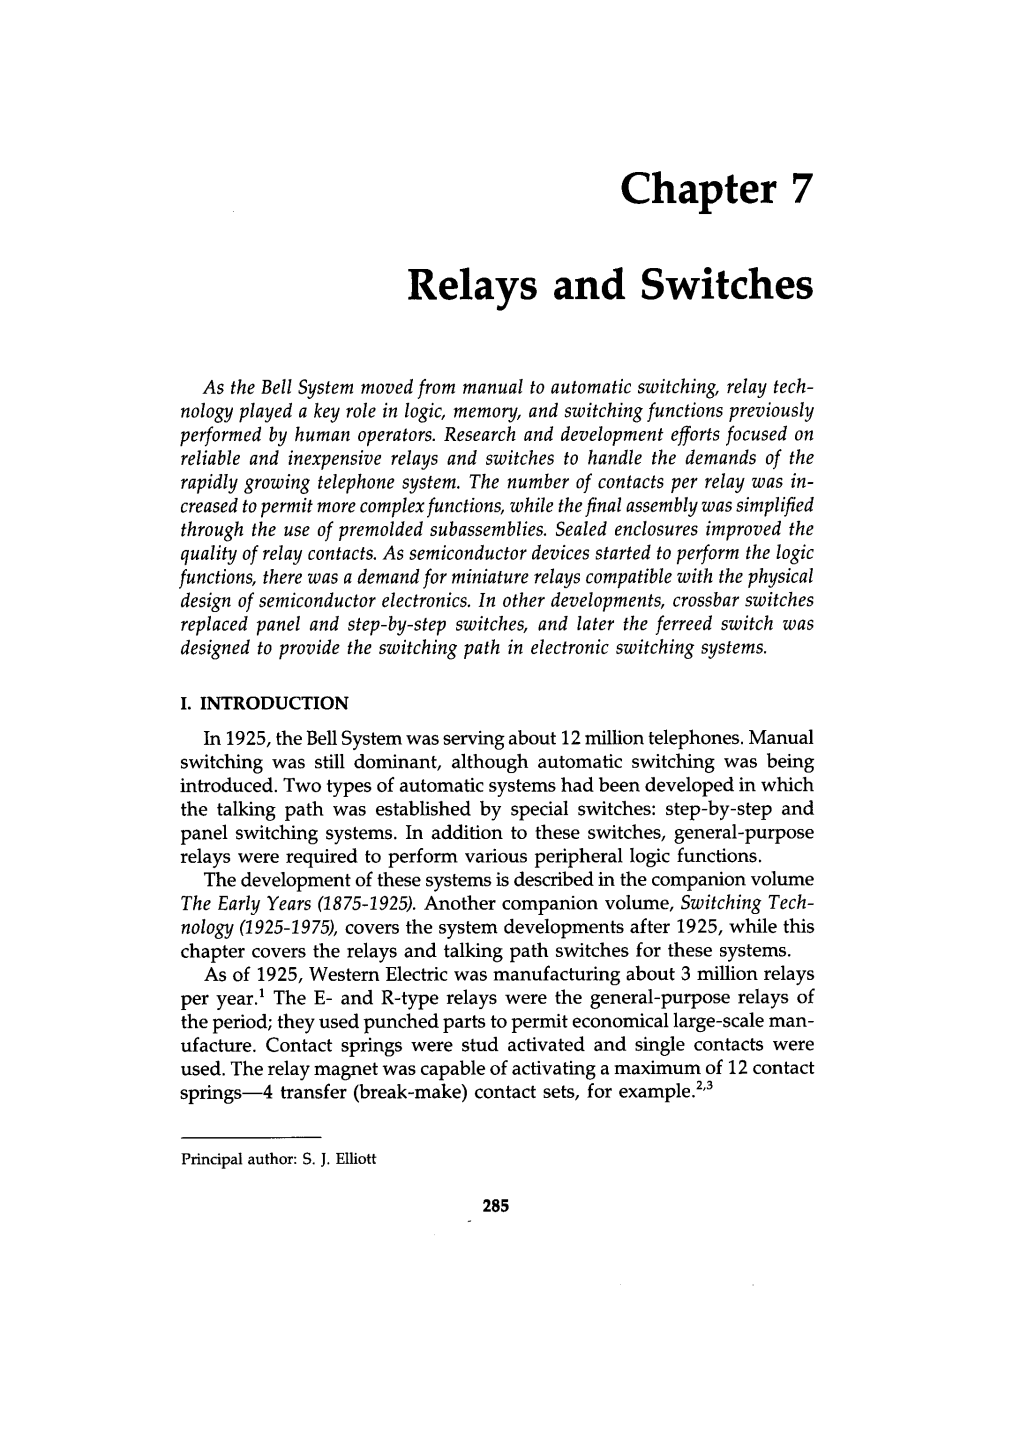 Chapter 7 Relays and Switches